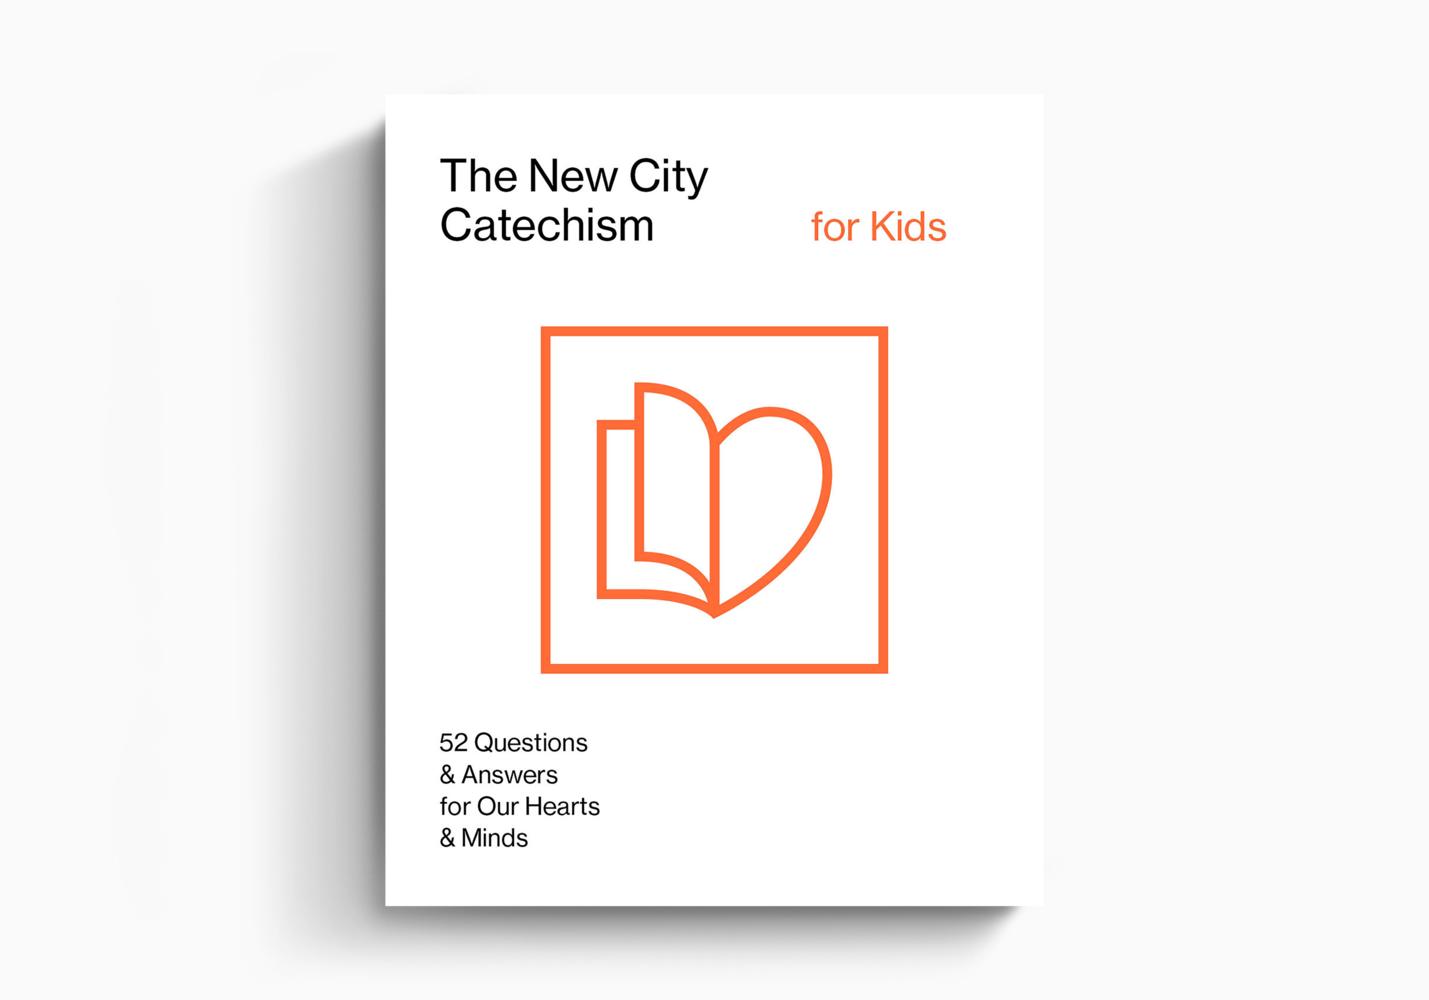 The New City Catechism for Kids image